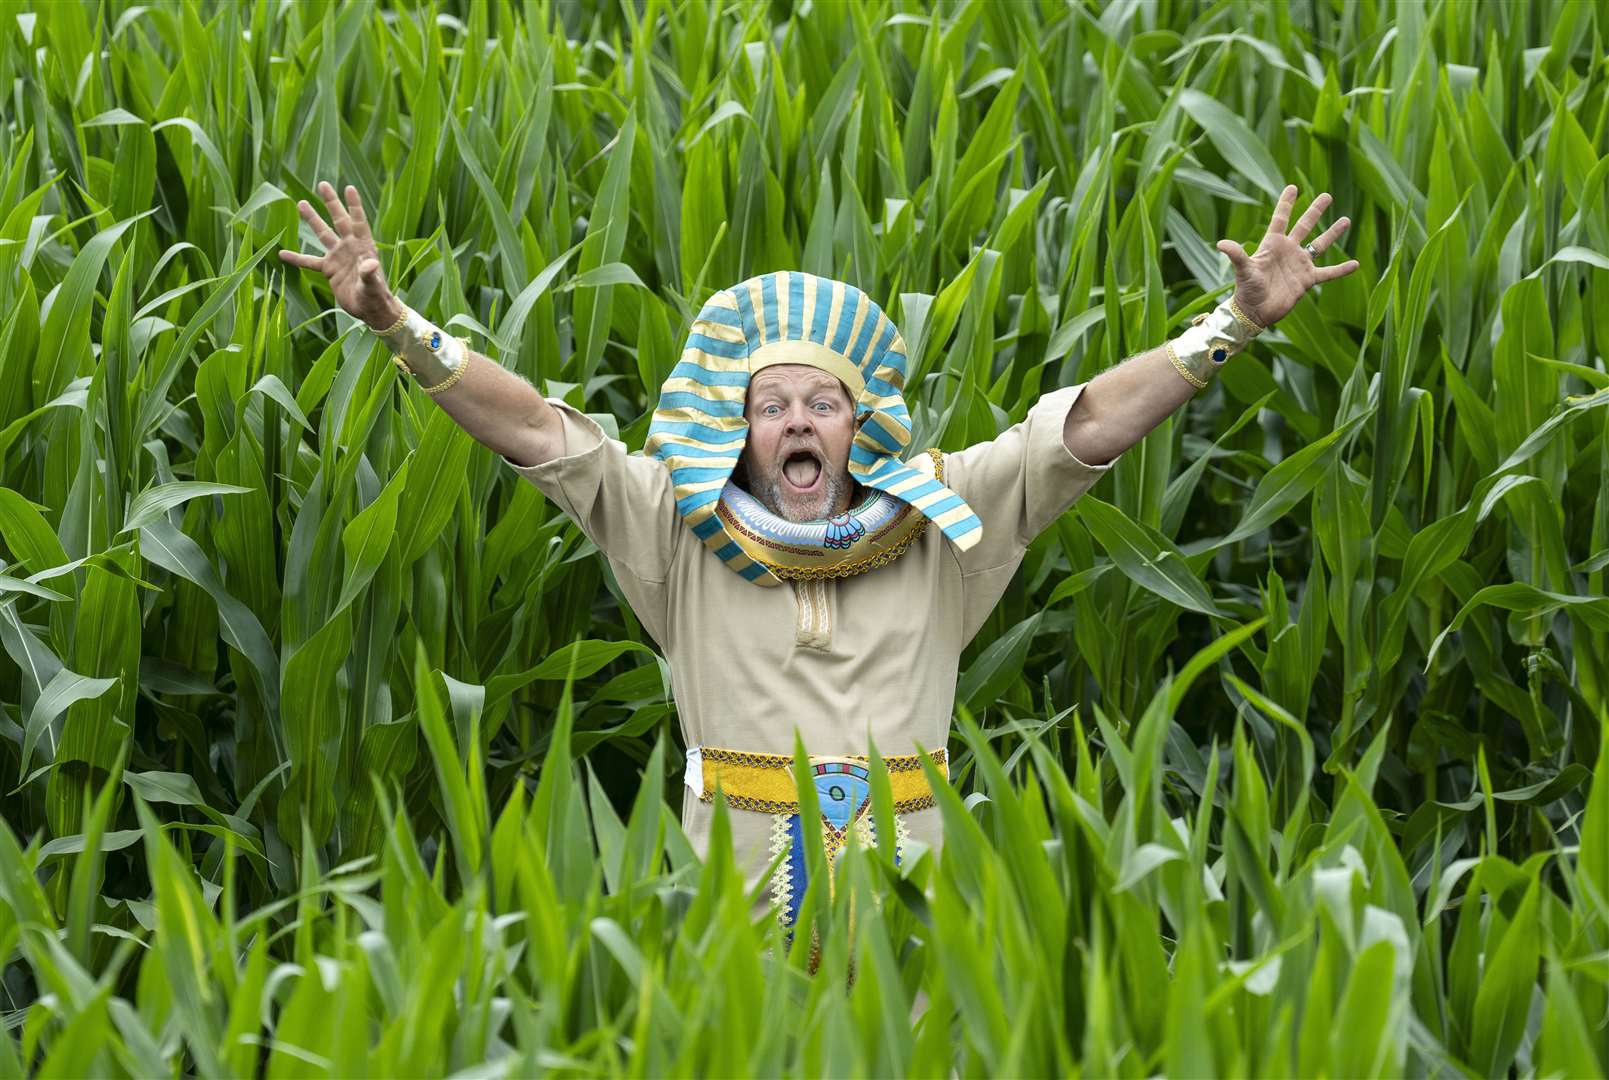 Farmer Tom Pearcy at the launch of the York Maze, which this year marks the centenary of the discovery of Tutankhamun’s tomb (Danny Lawson/PA)